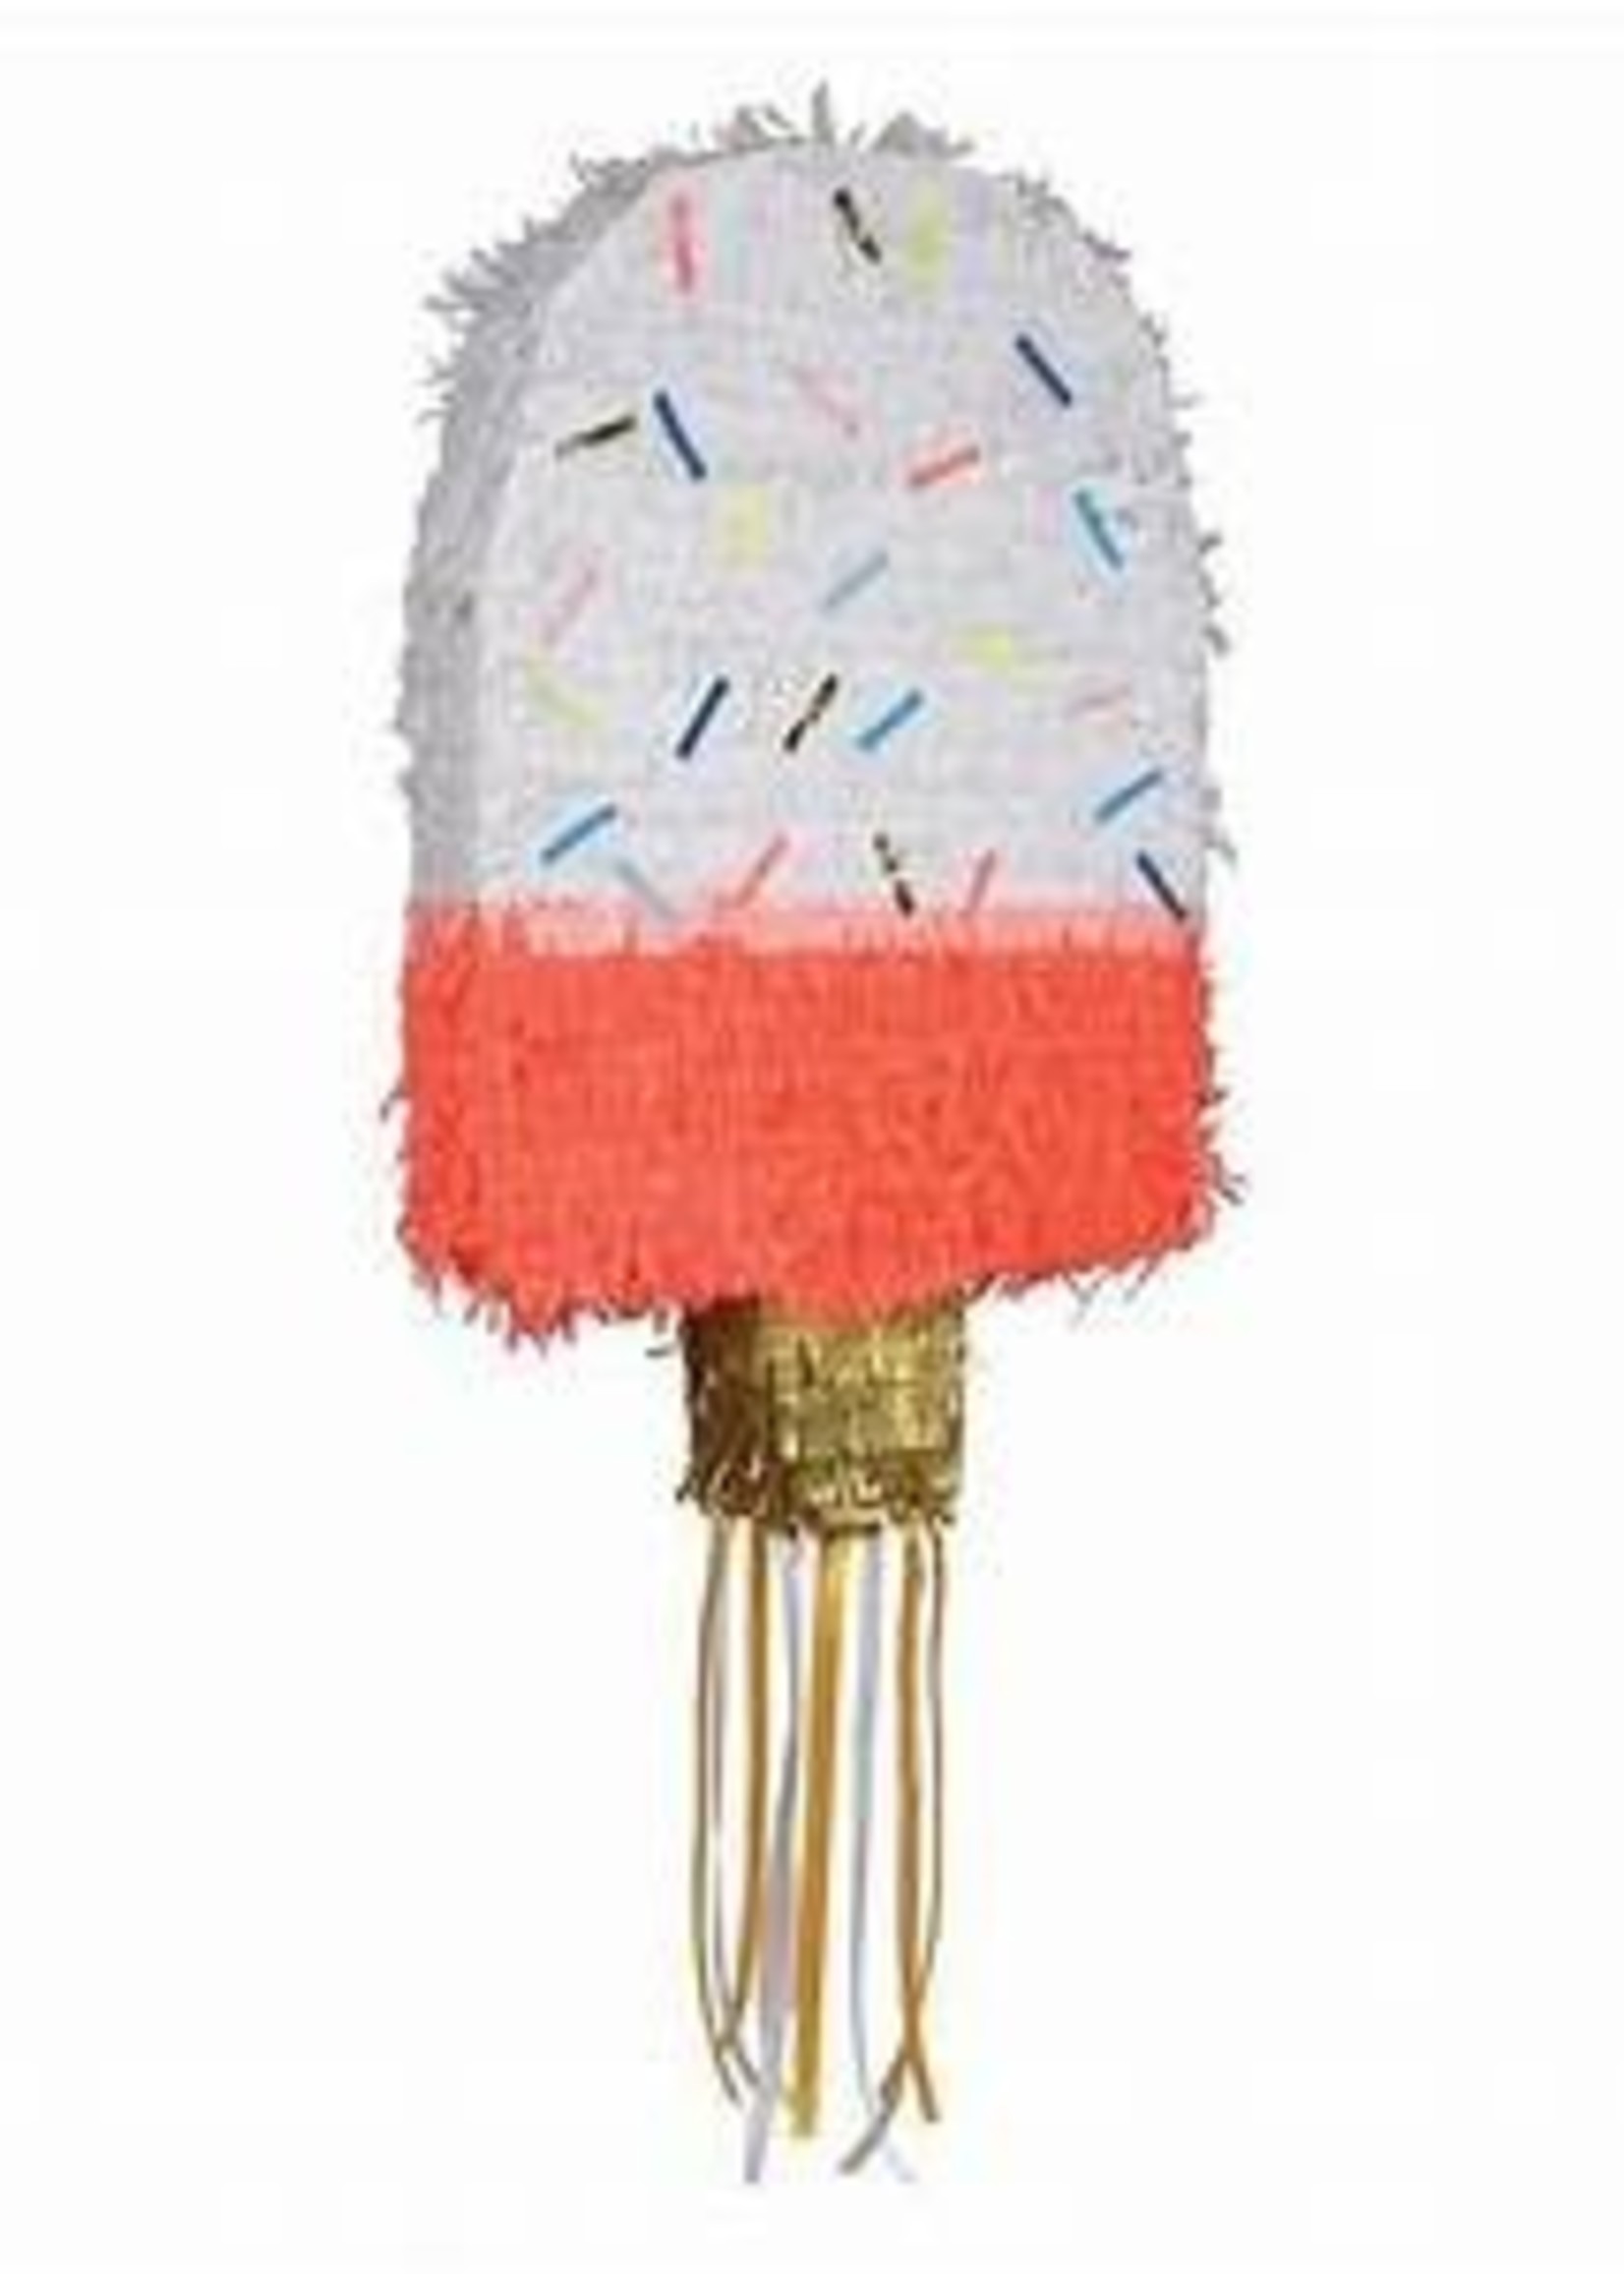 Creative Twist Events Popsicle Party Pinata